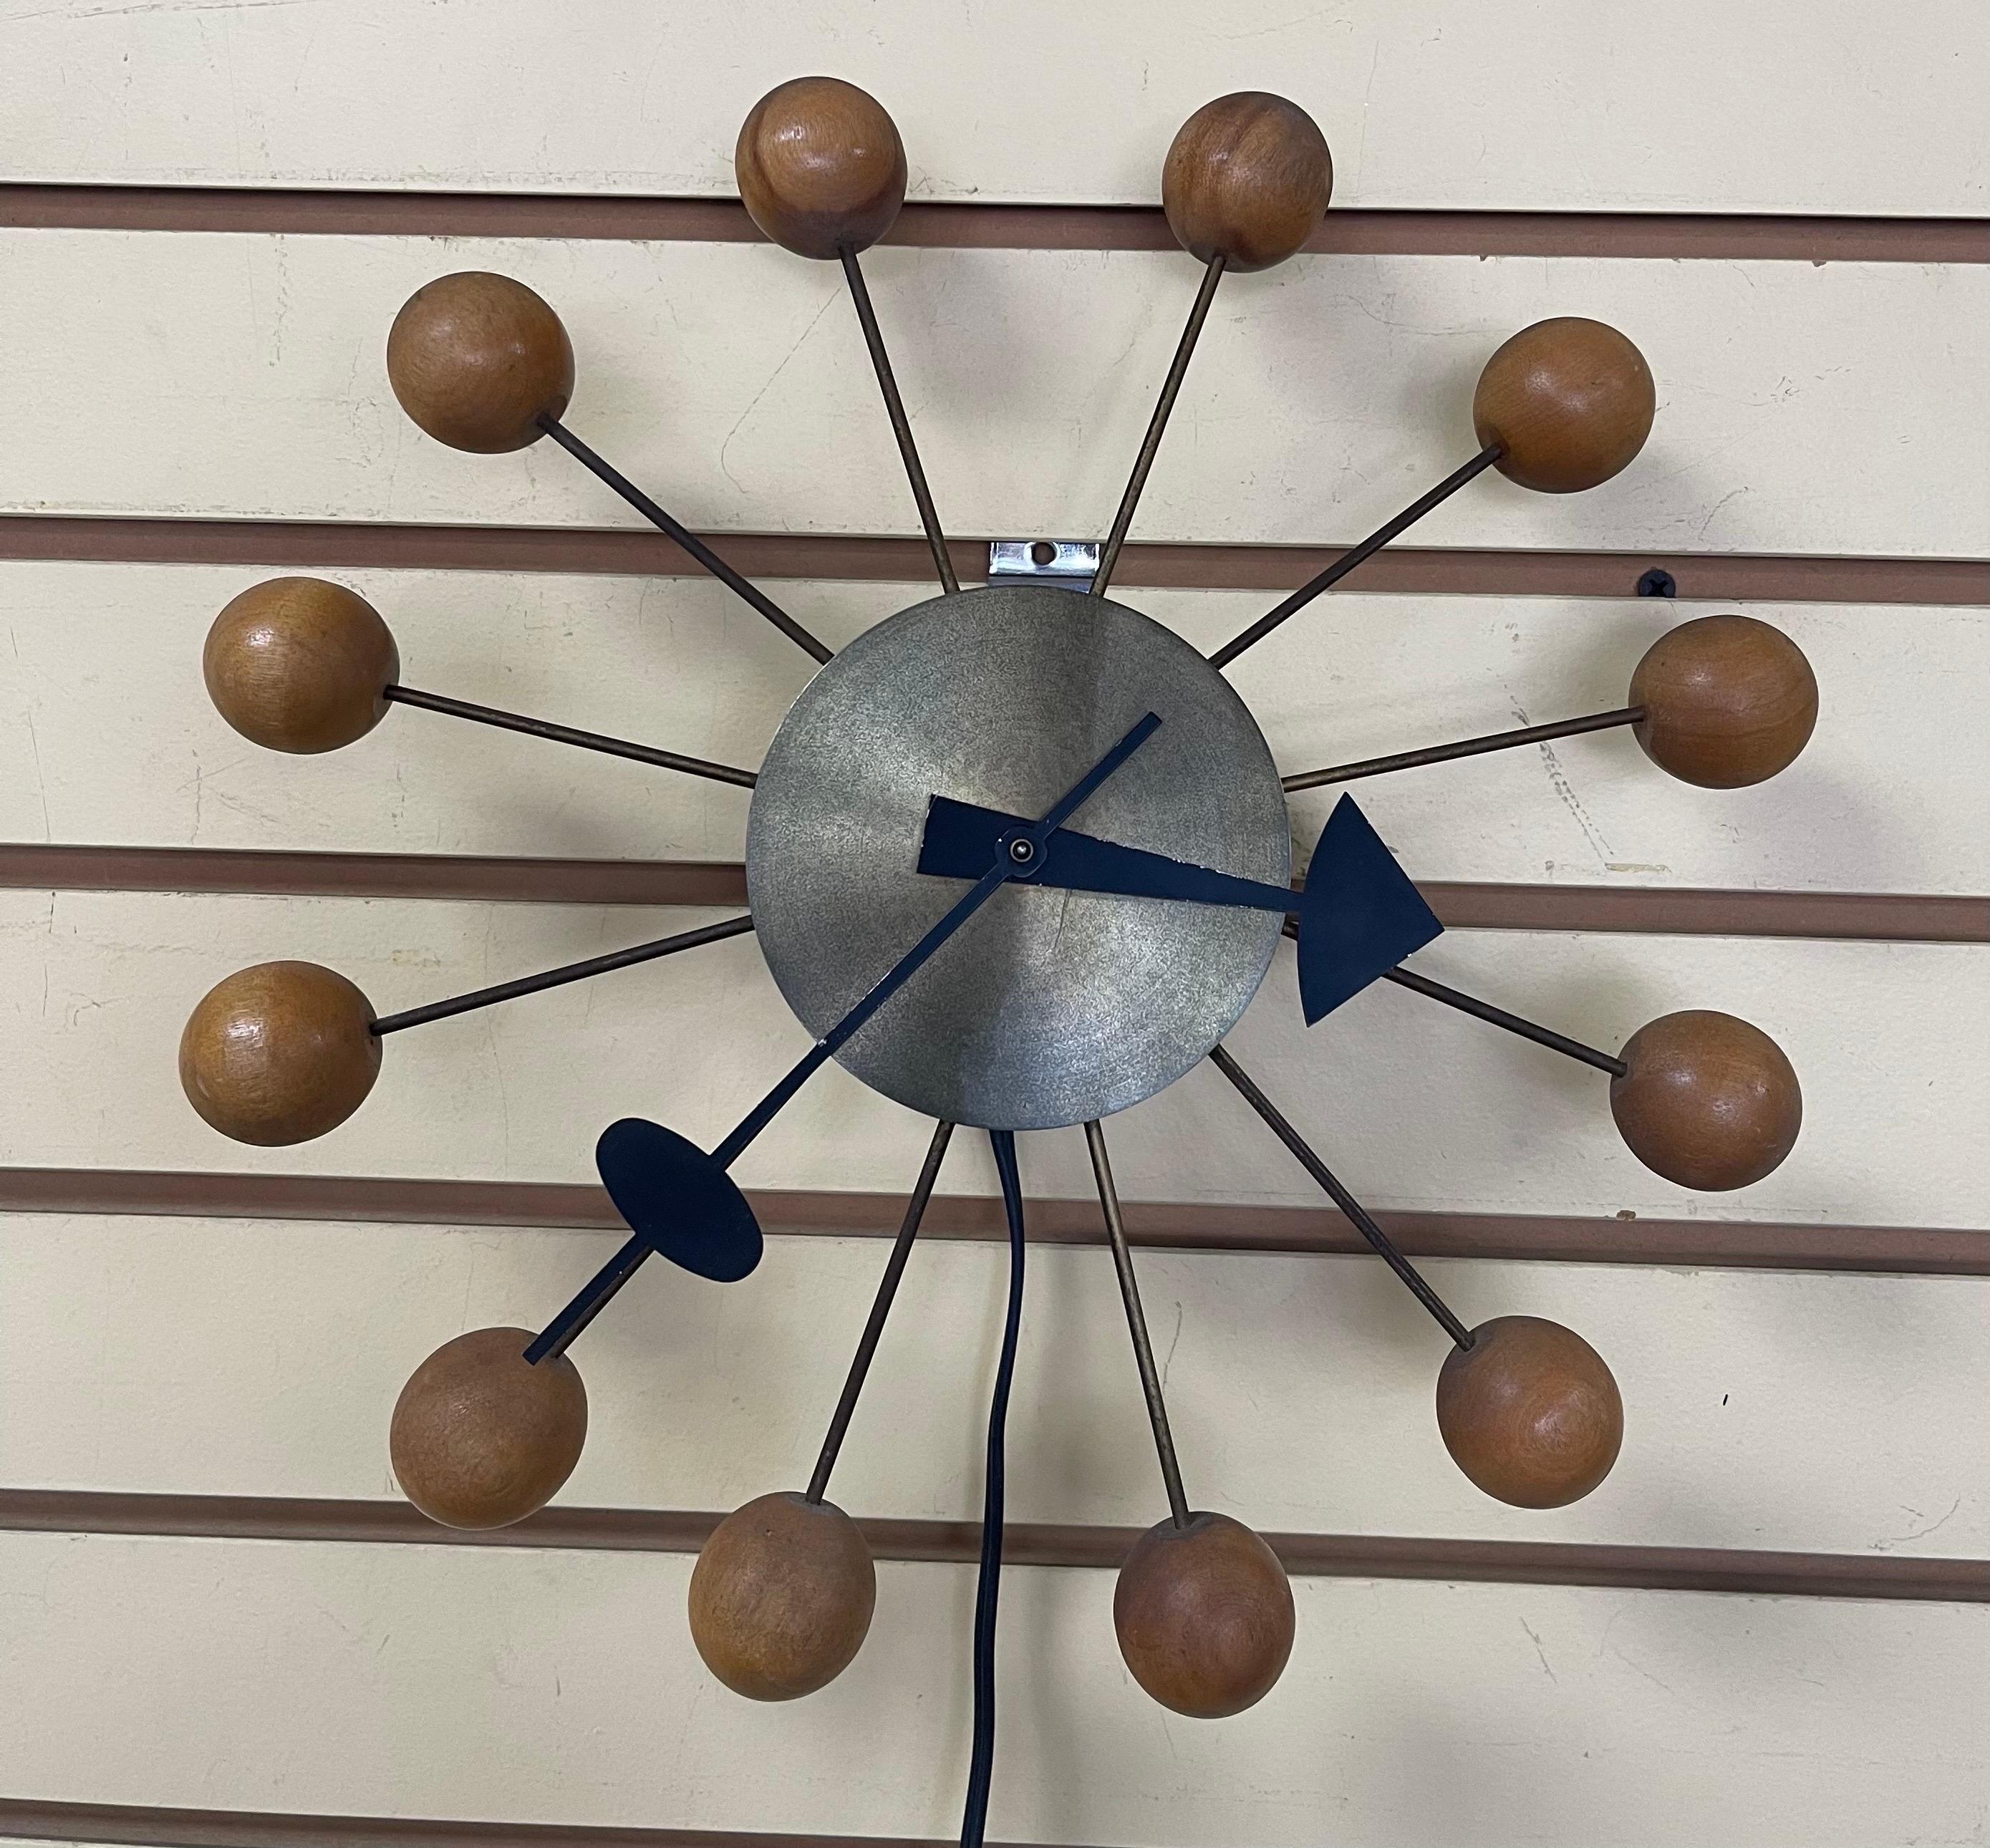 A very hard to find and early iconic ball clock designed by George Nelson for Howard Miller, circa 1950s.  The clock is in original vintage condition with an 8 feet long plug in electrical cord (the cord may have been replaced), brushed brass